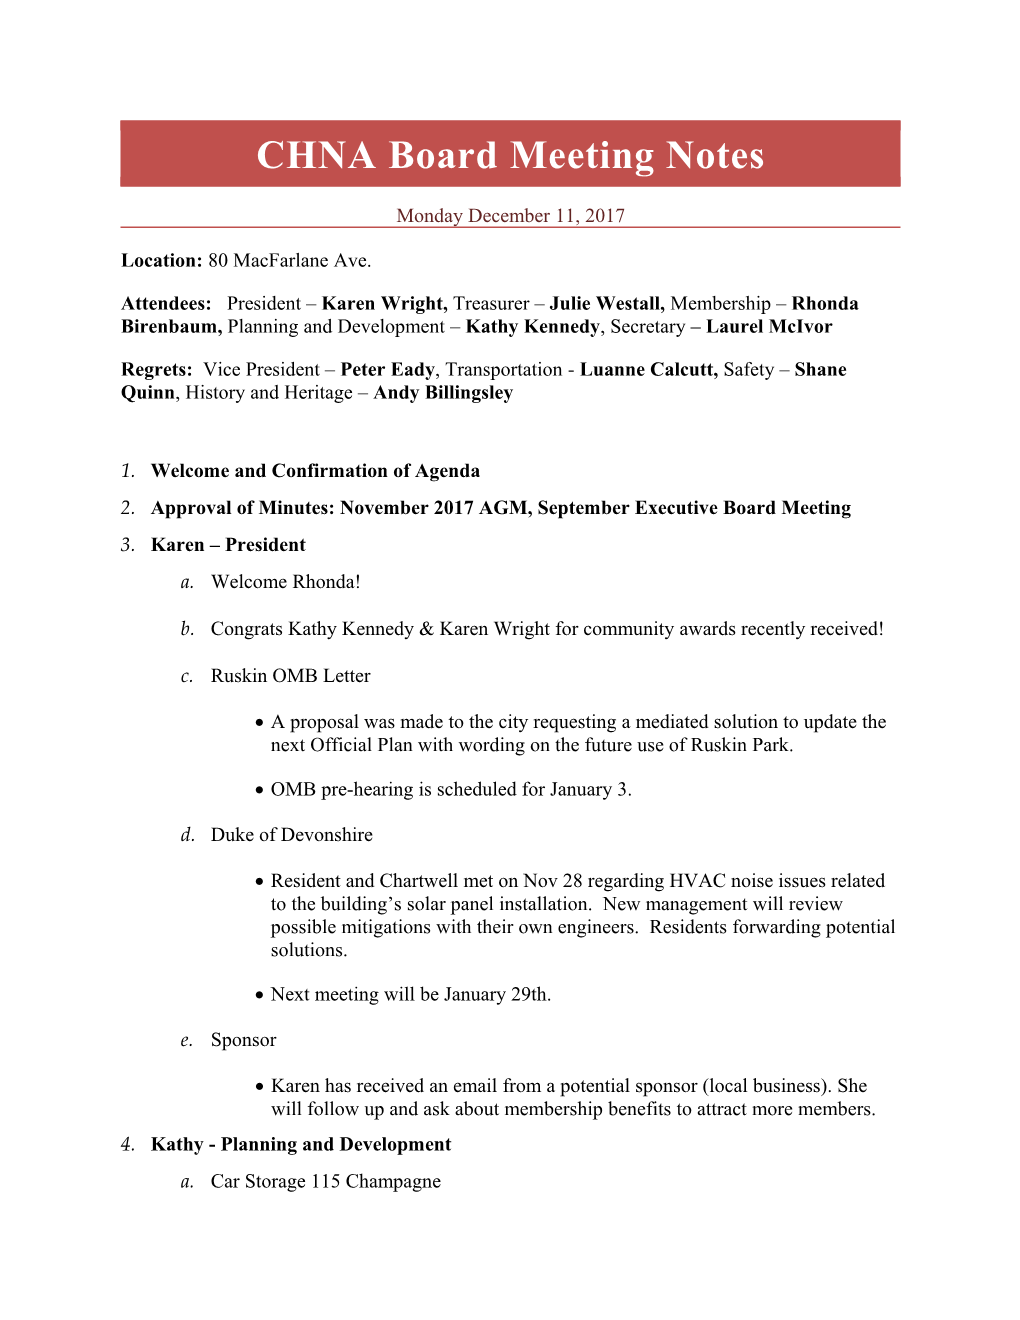 CHNA Annual General Meeting